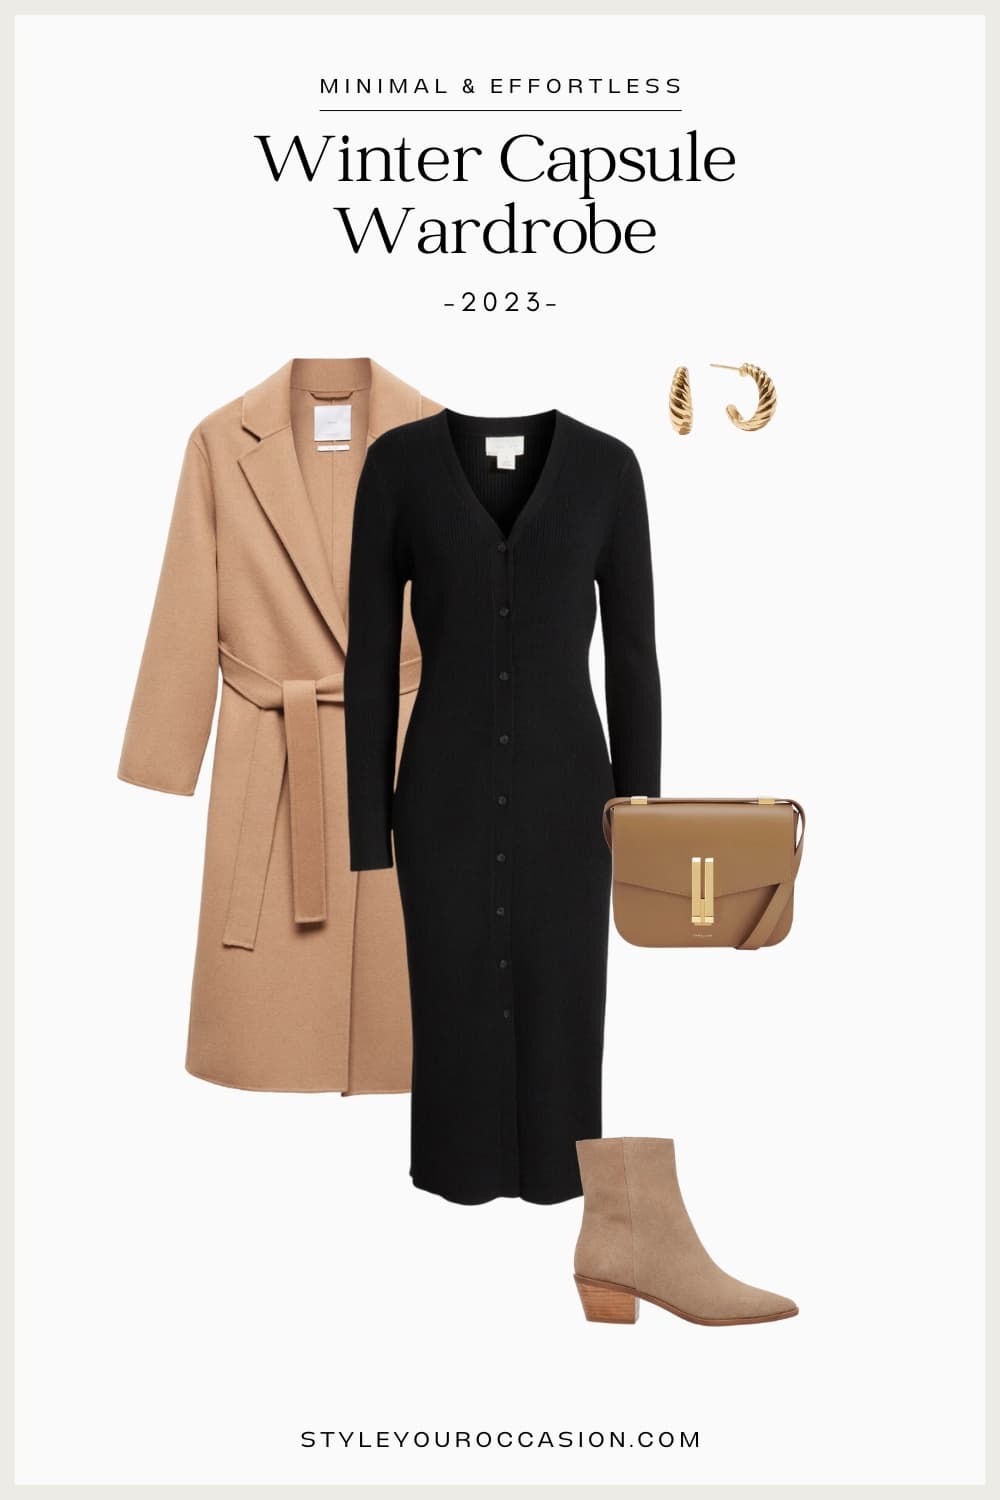 outfit from a winter capsule wardrobe with a camel wool coat, midi length black sweater dress, suede tan boots, and a camel leather bag